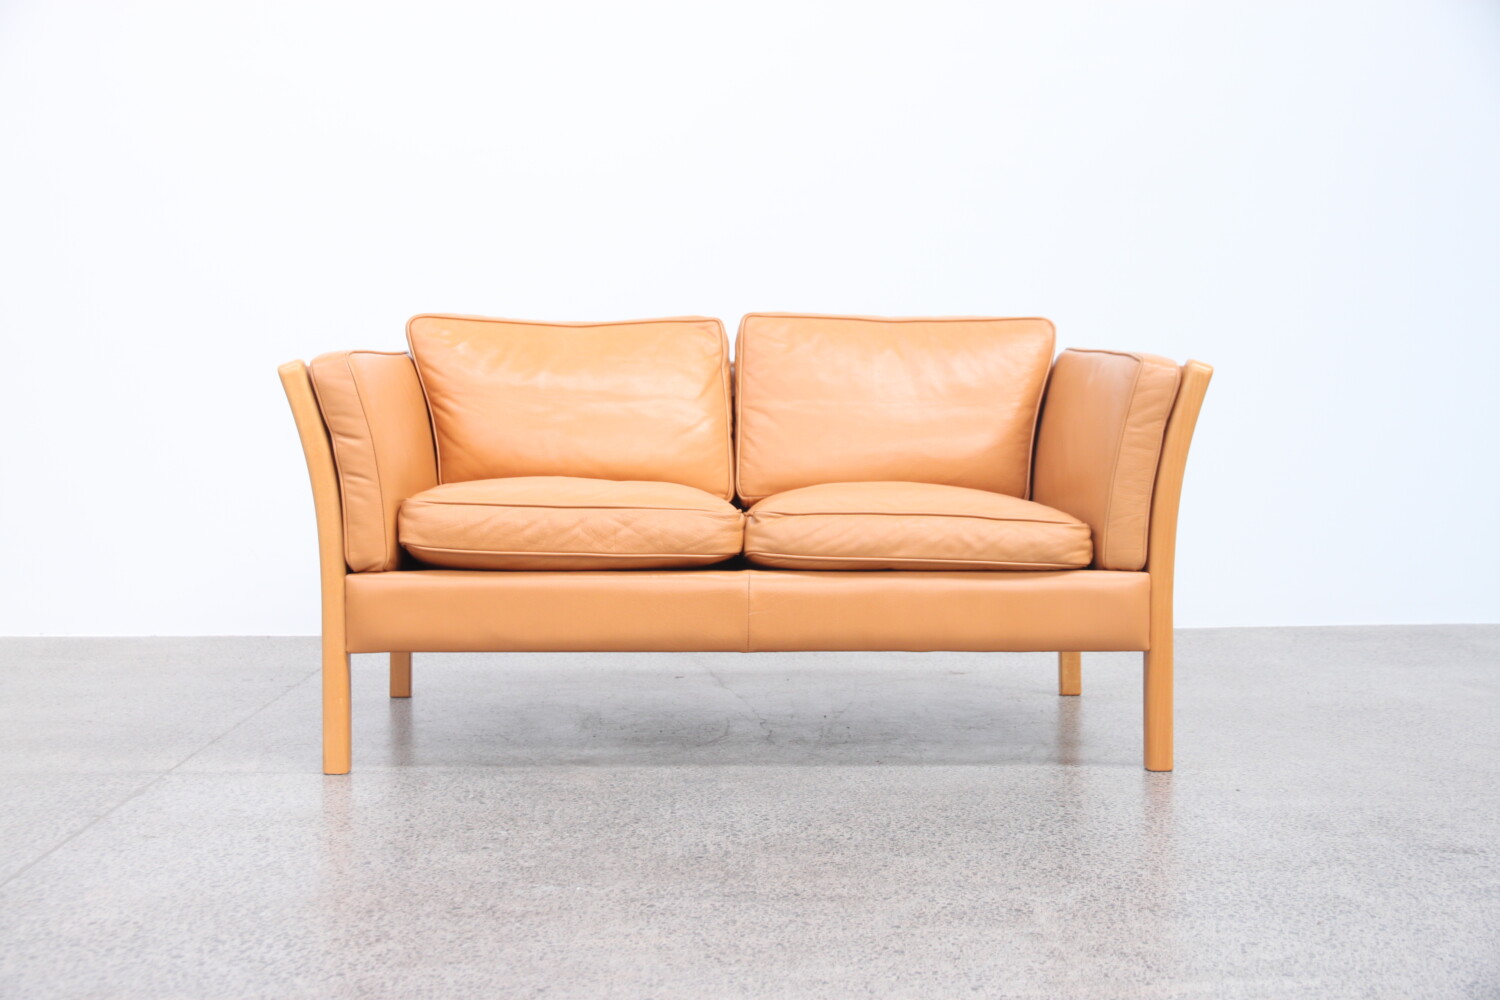 Pair of Tan Leather Sofas by Stouby